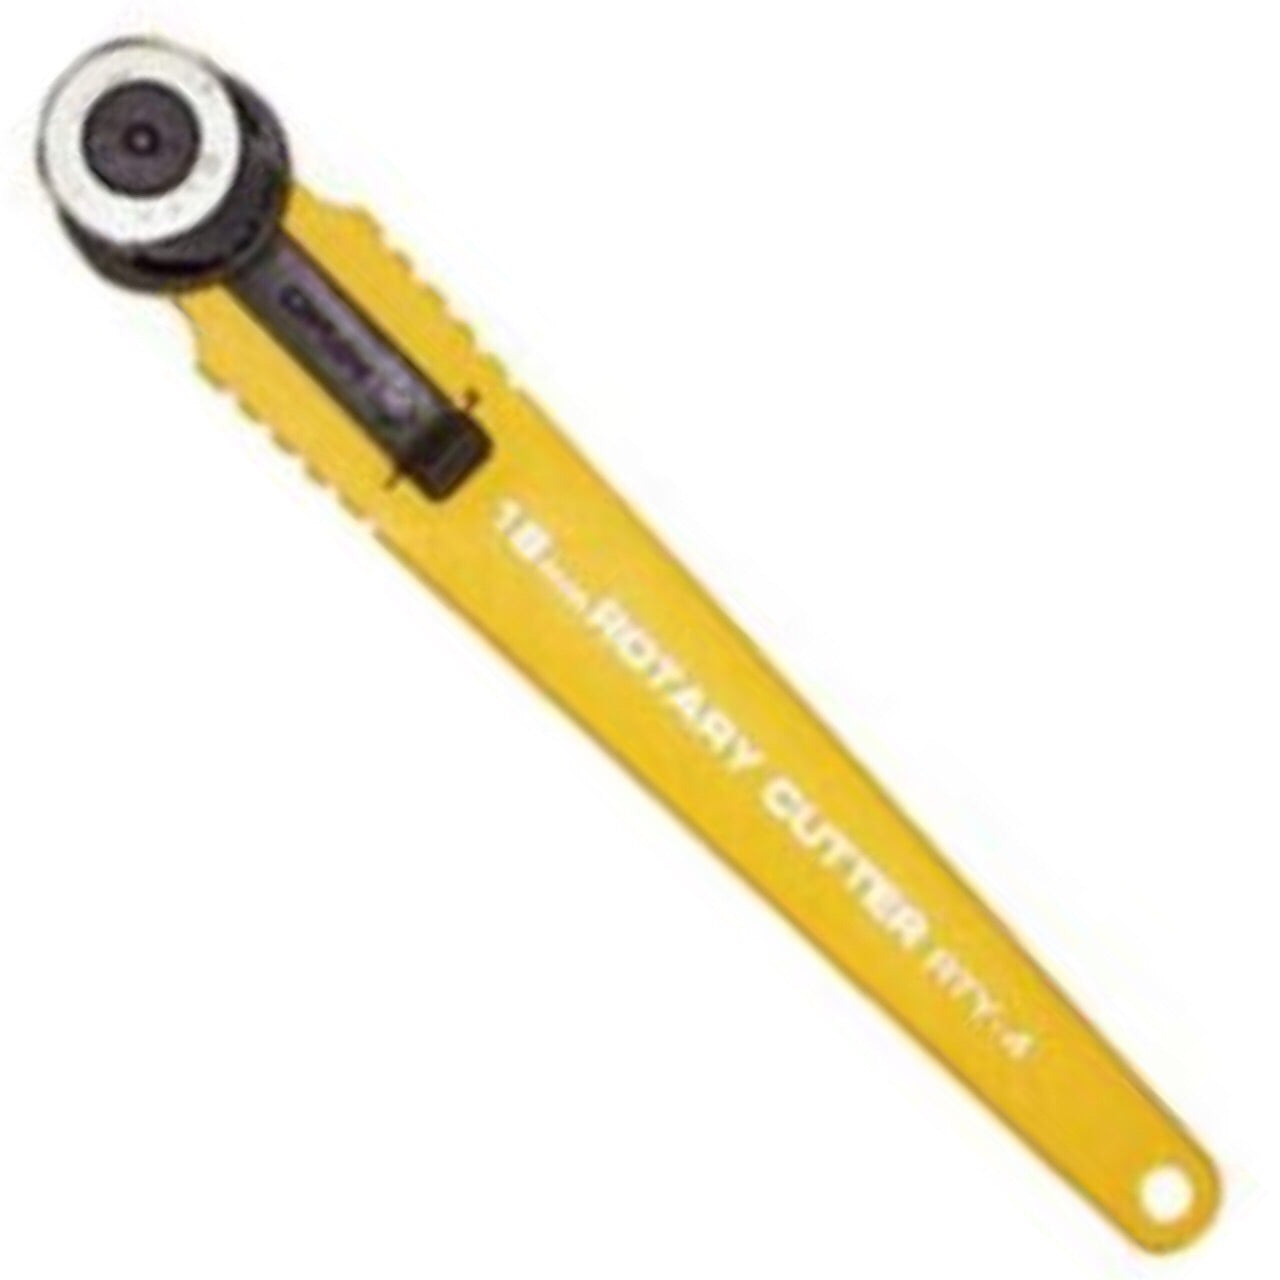 Rotary Cutter - 18 mm